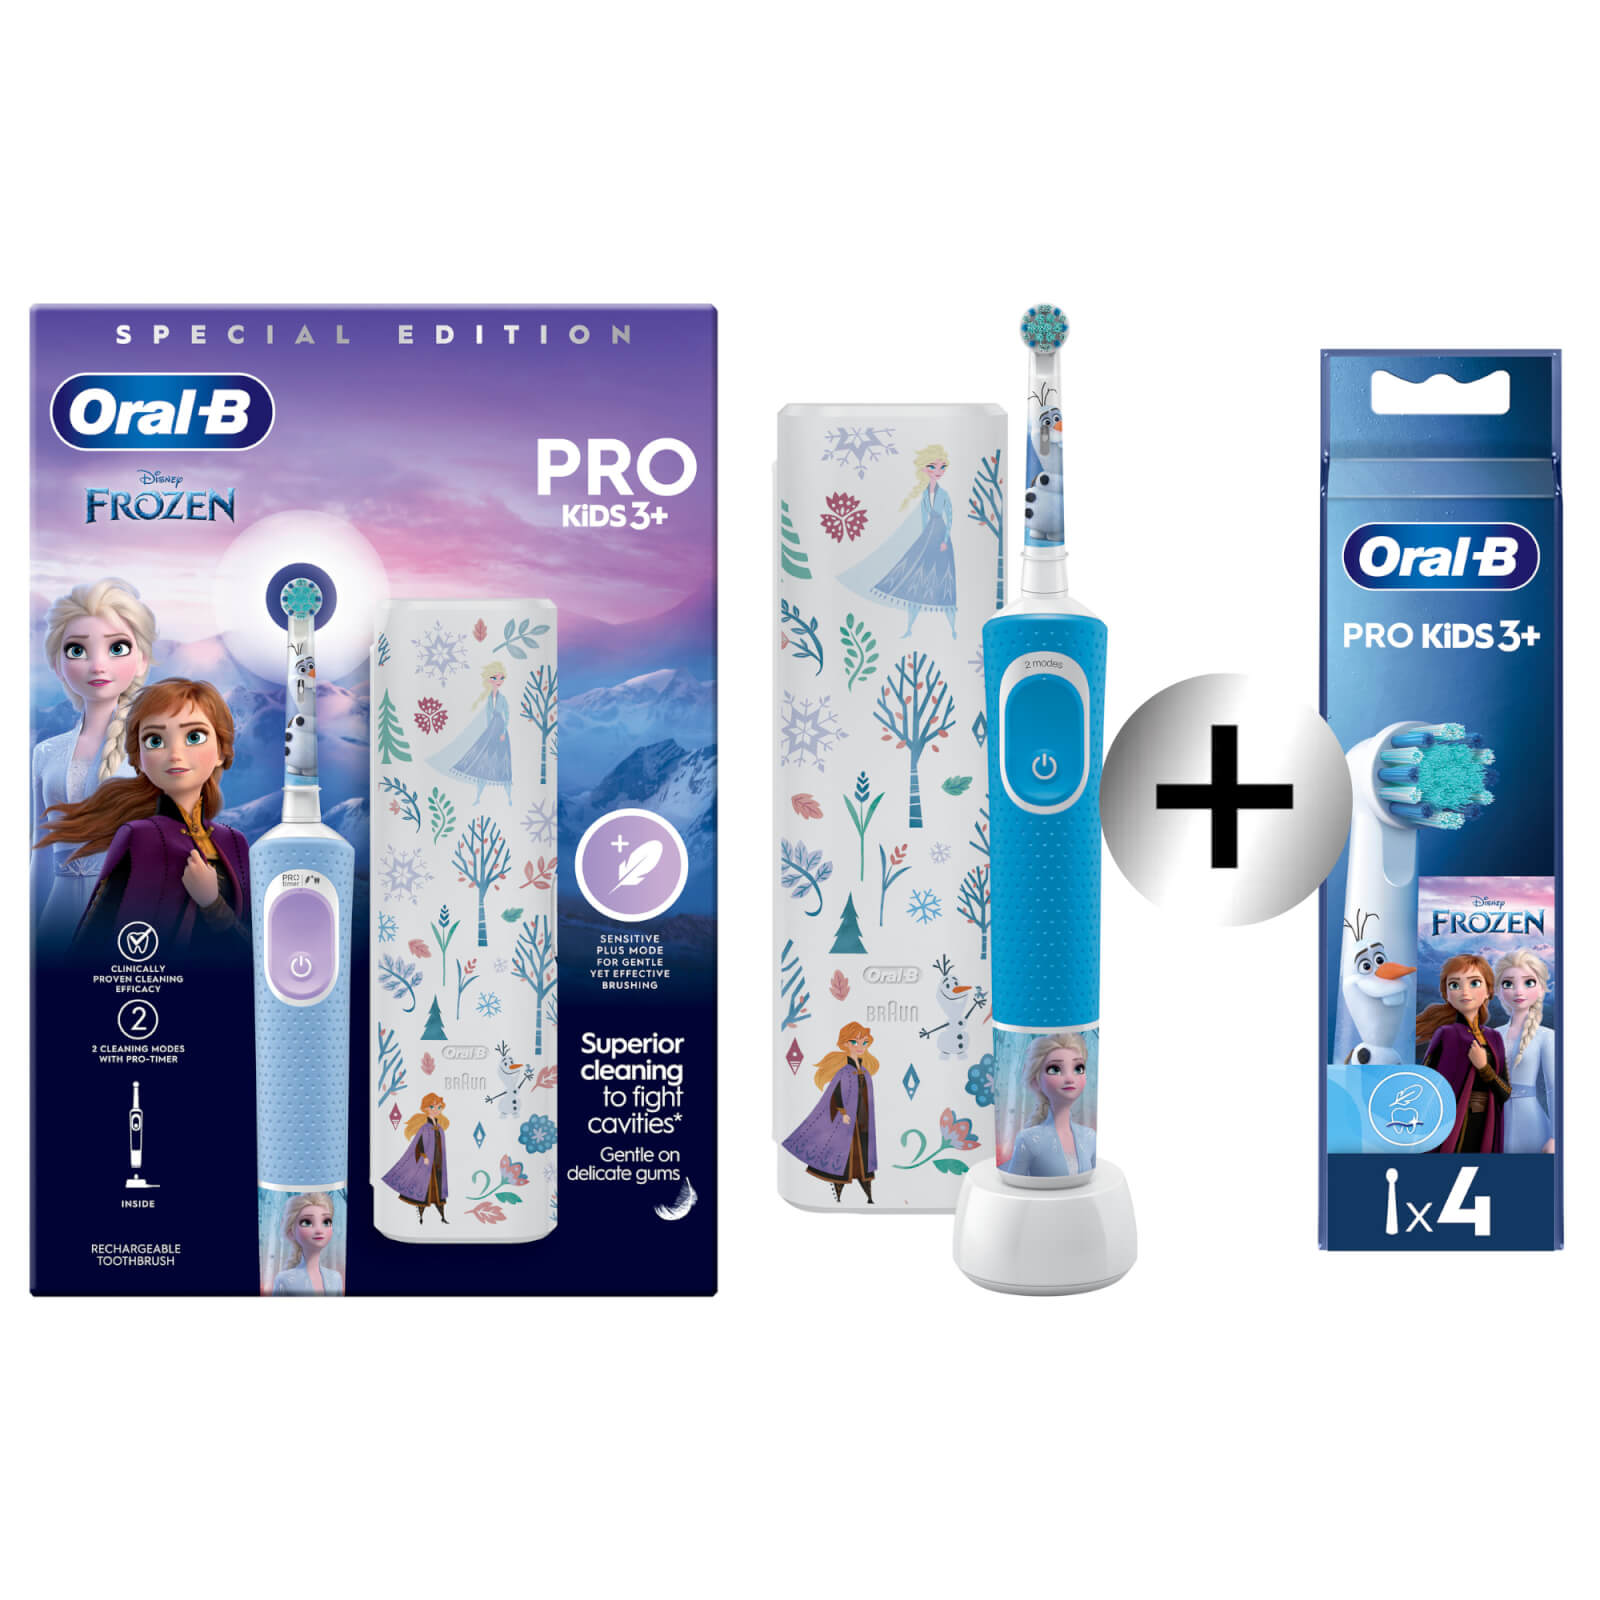 Oral B Kids Electric Toothbrush Frozen Giftset - Vitality PRO - Toothbrush + 4 Refills